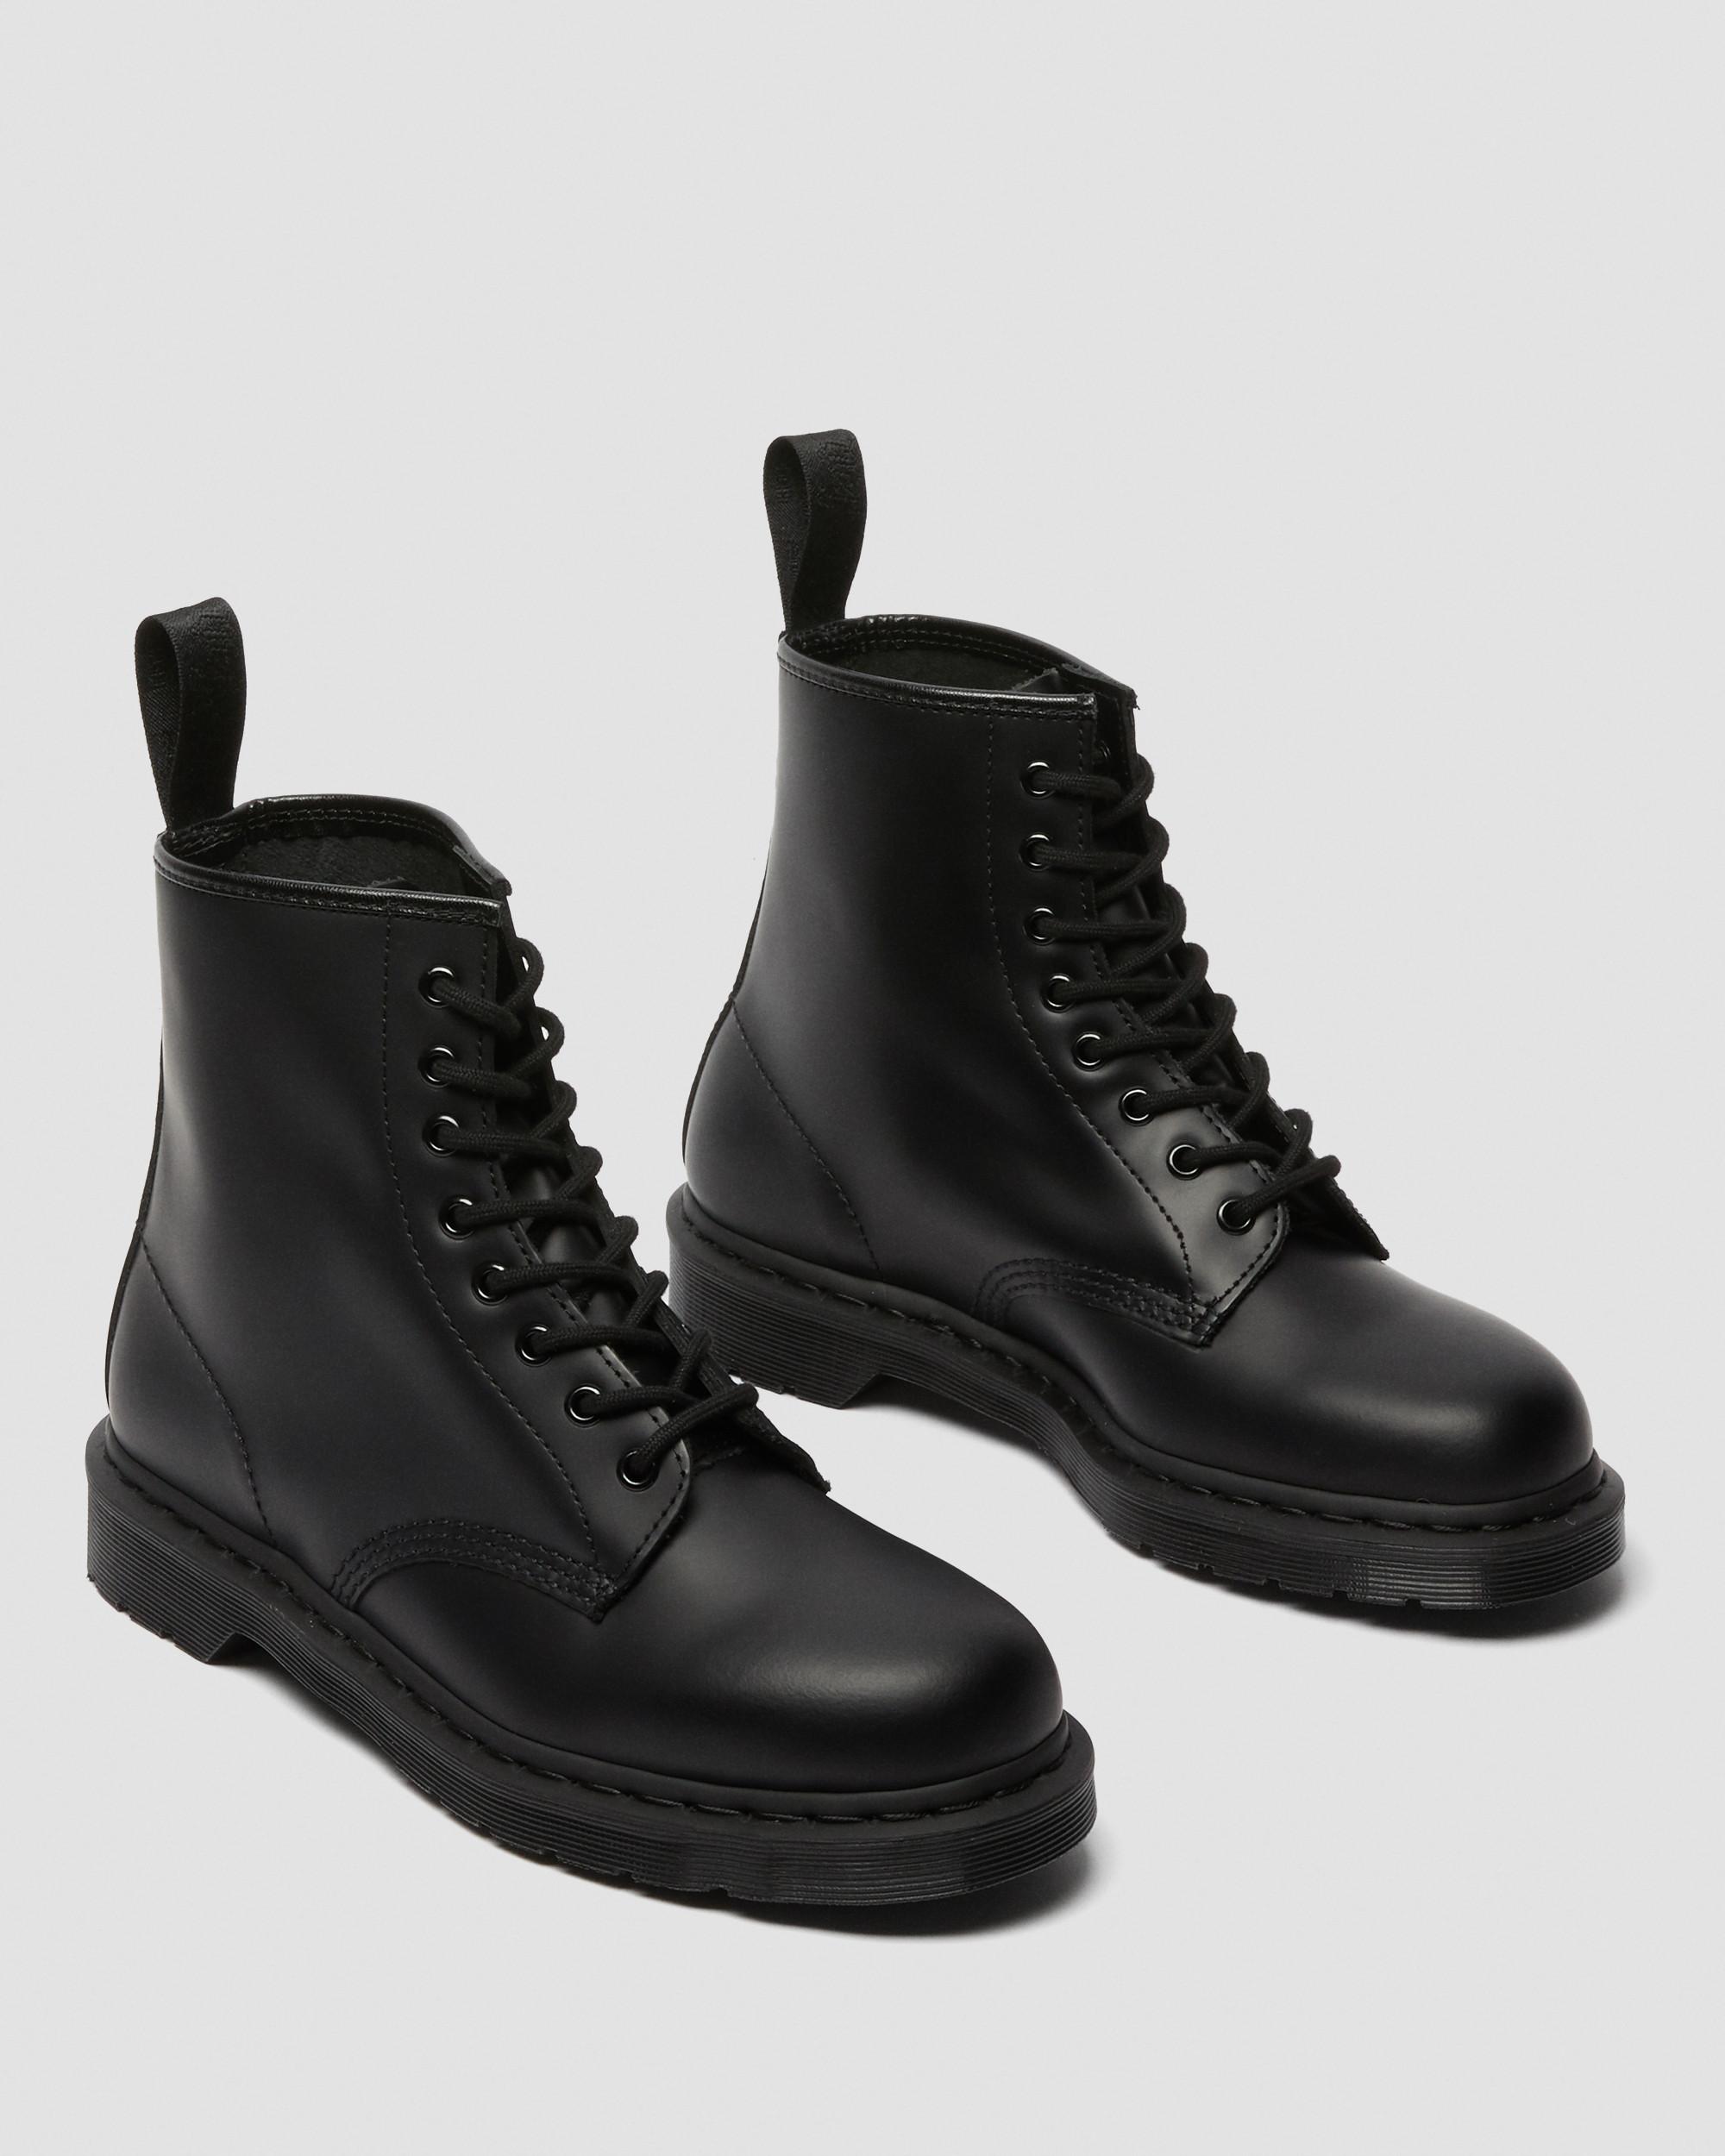 1460 Mono Smooth Leather Lace Up Boots, Black | Dr. Martens